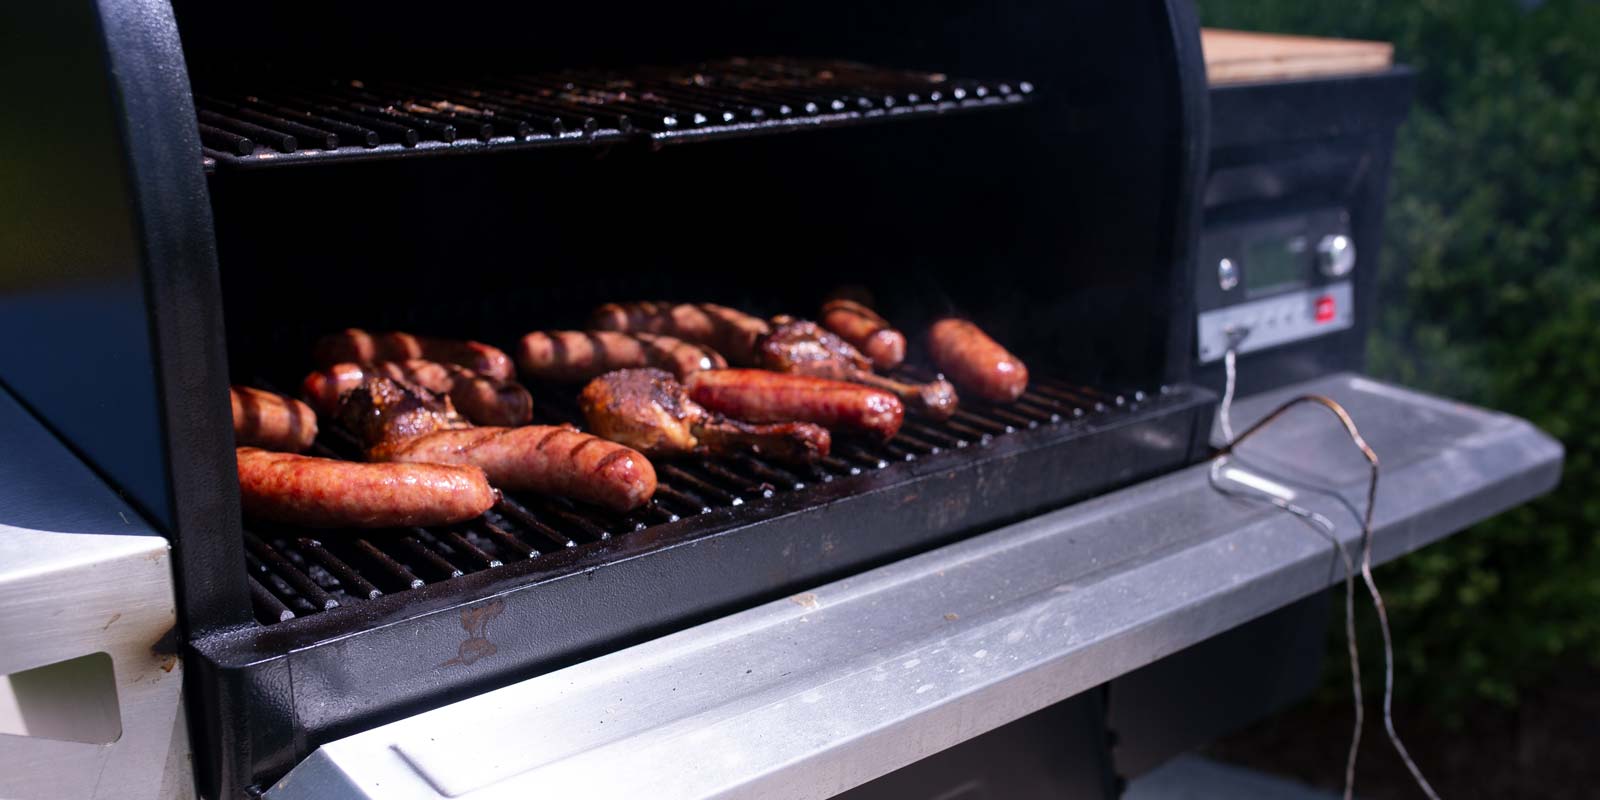 Hot dogs grilling on a traeger